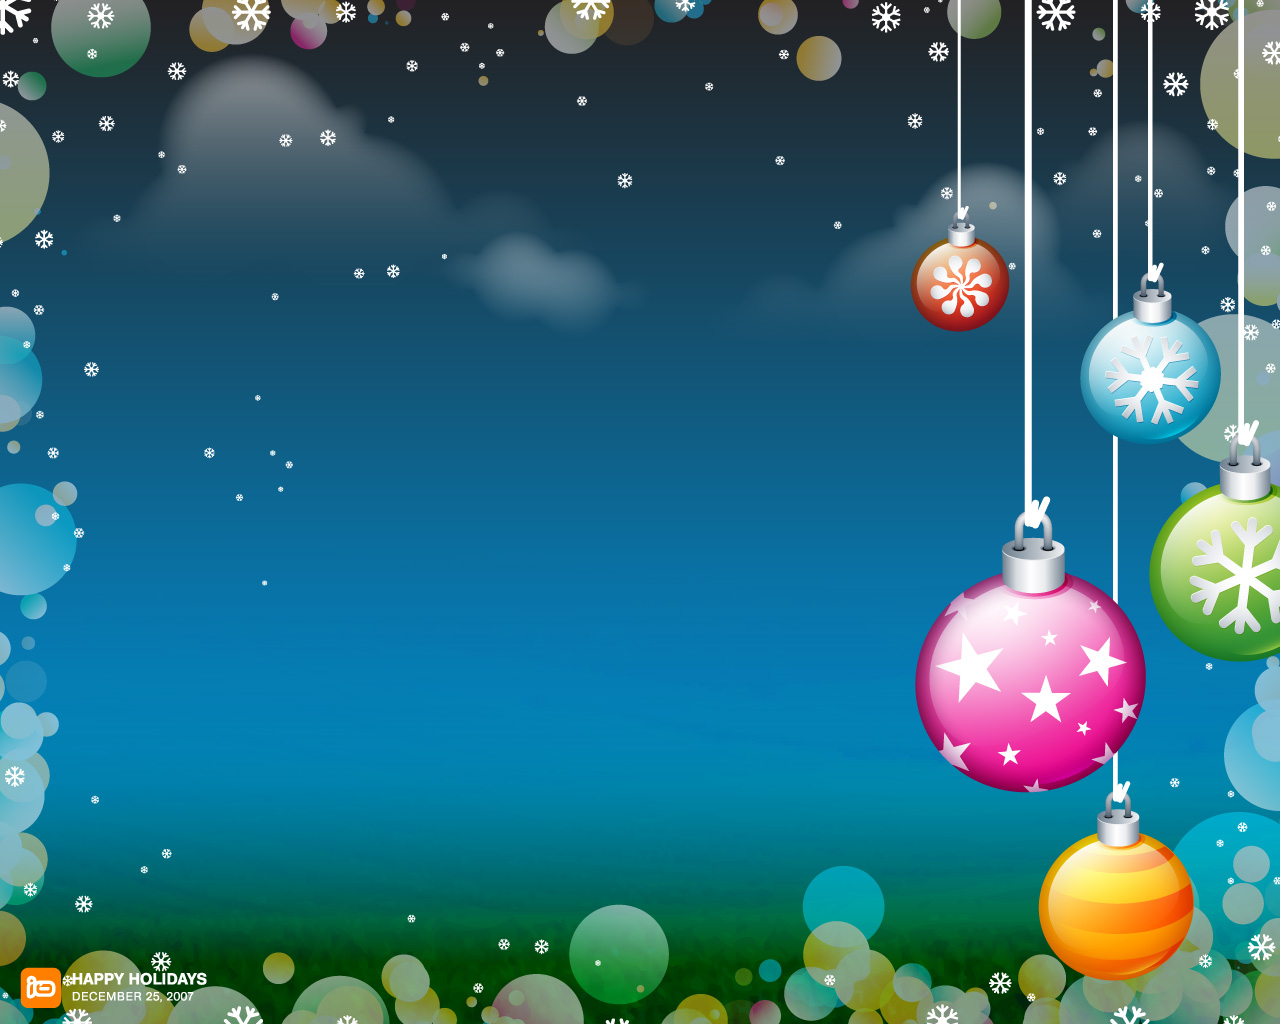 Christmas Holiday Backgrounds Wallpapers Wallpapers High